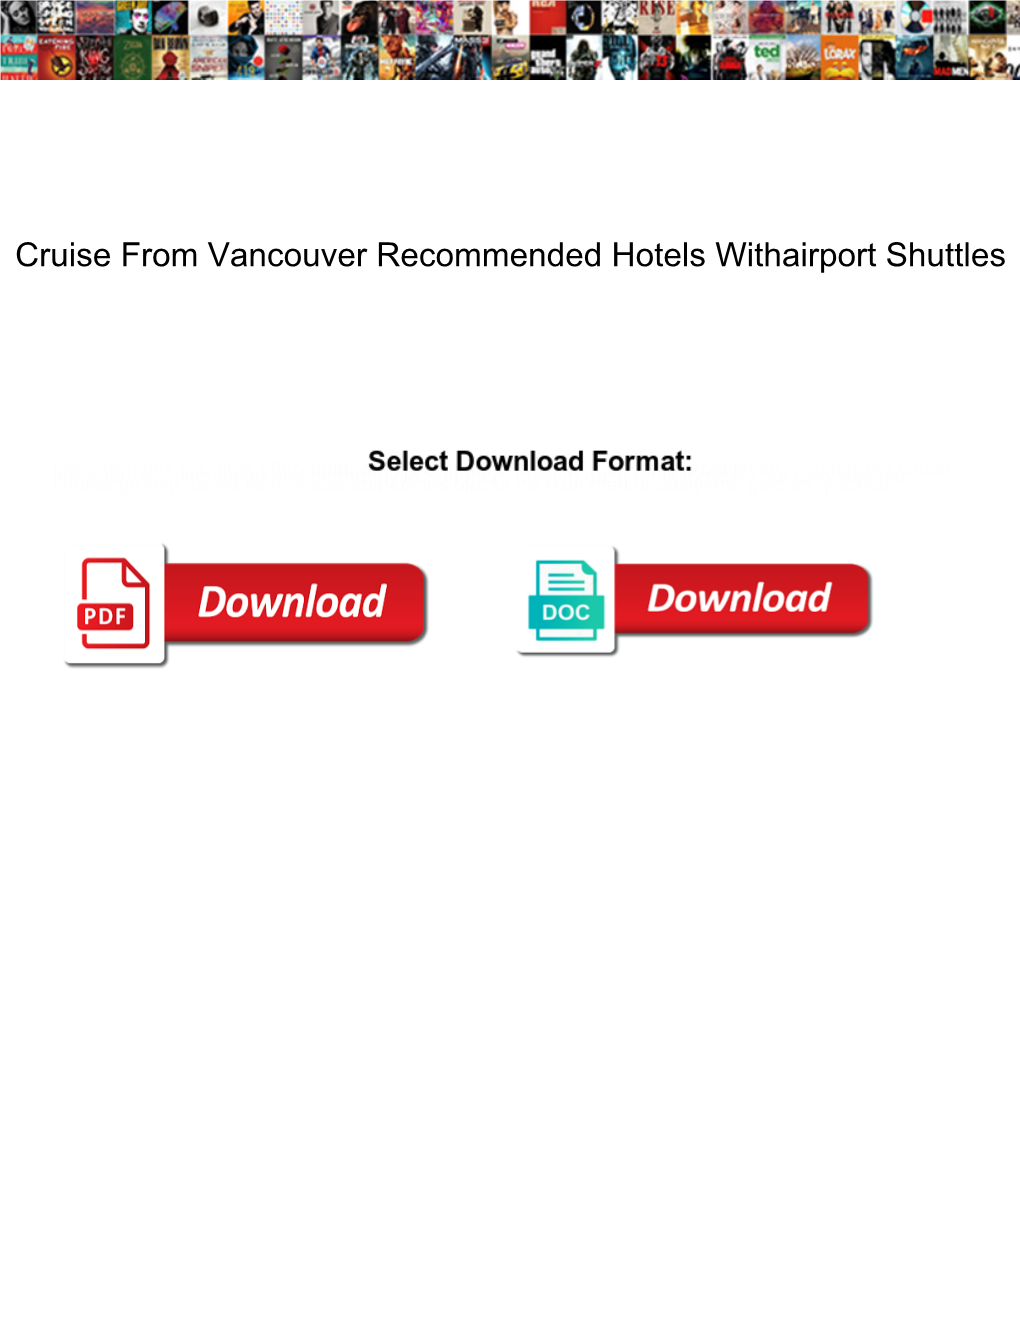 Cruise from Vancouver Recommended Hotels Withairport Shuttles